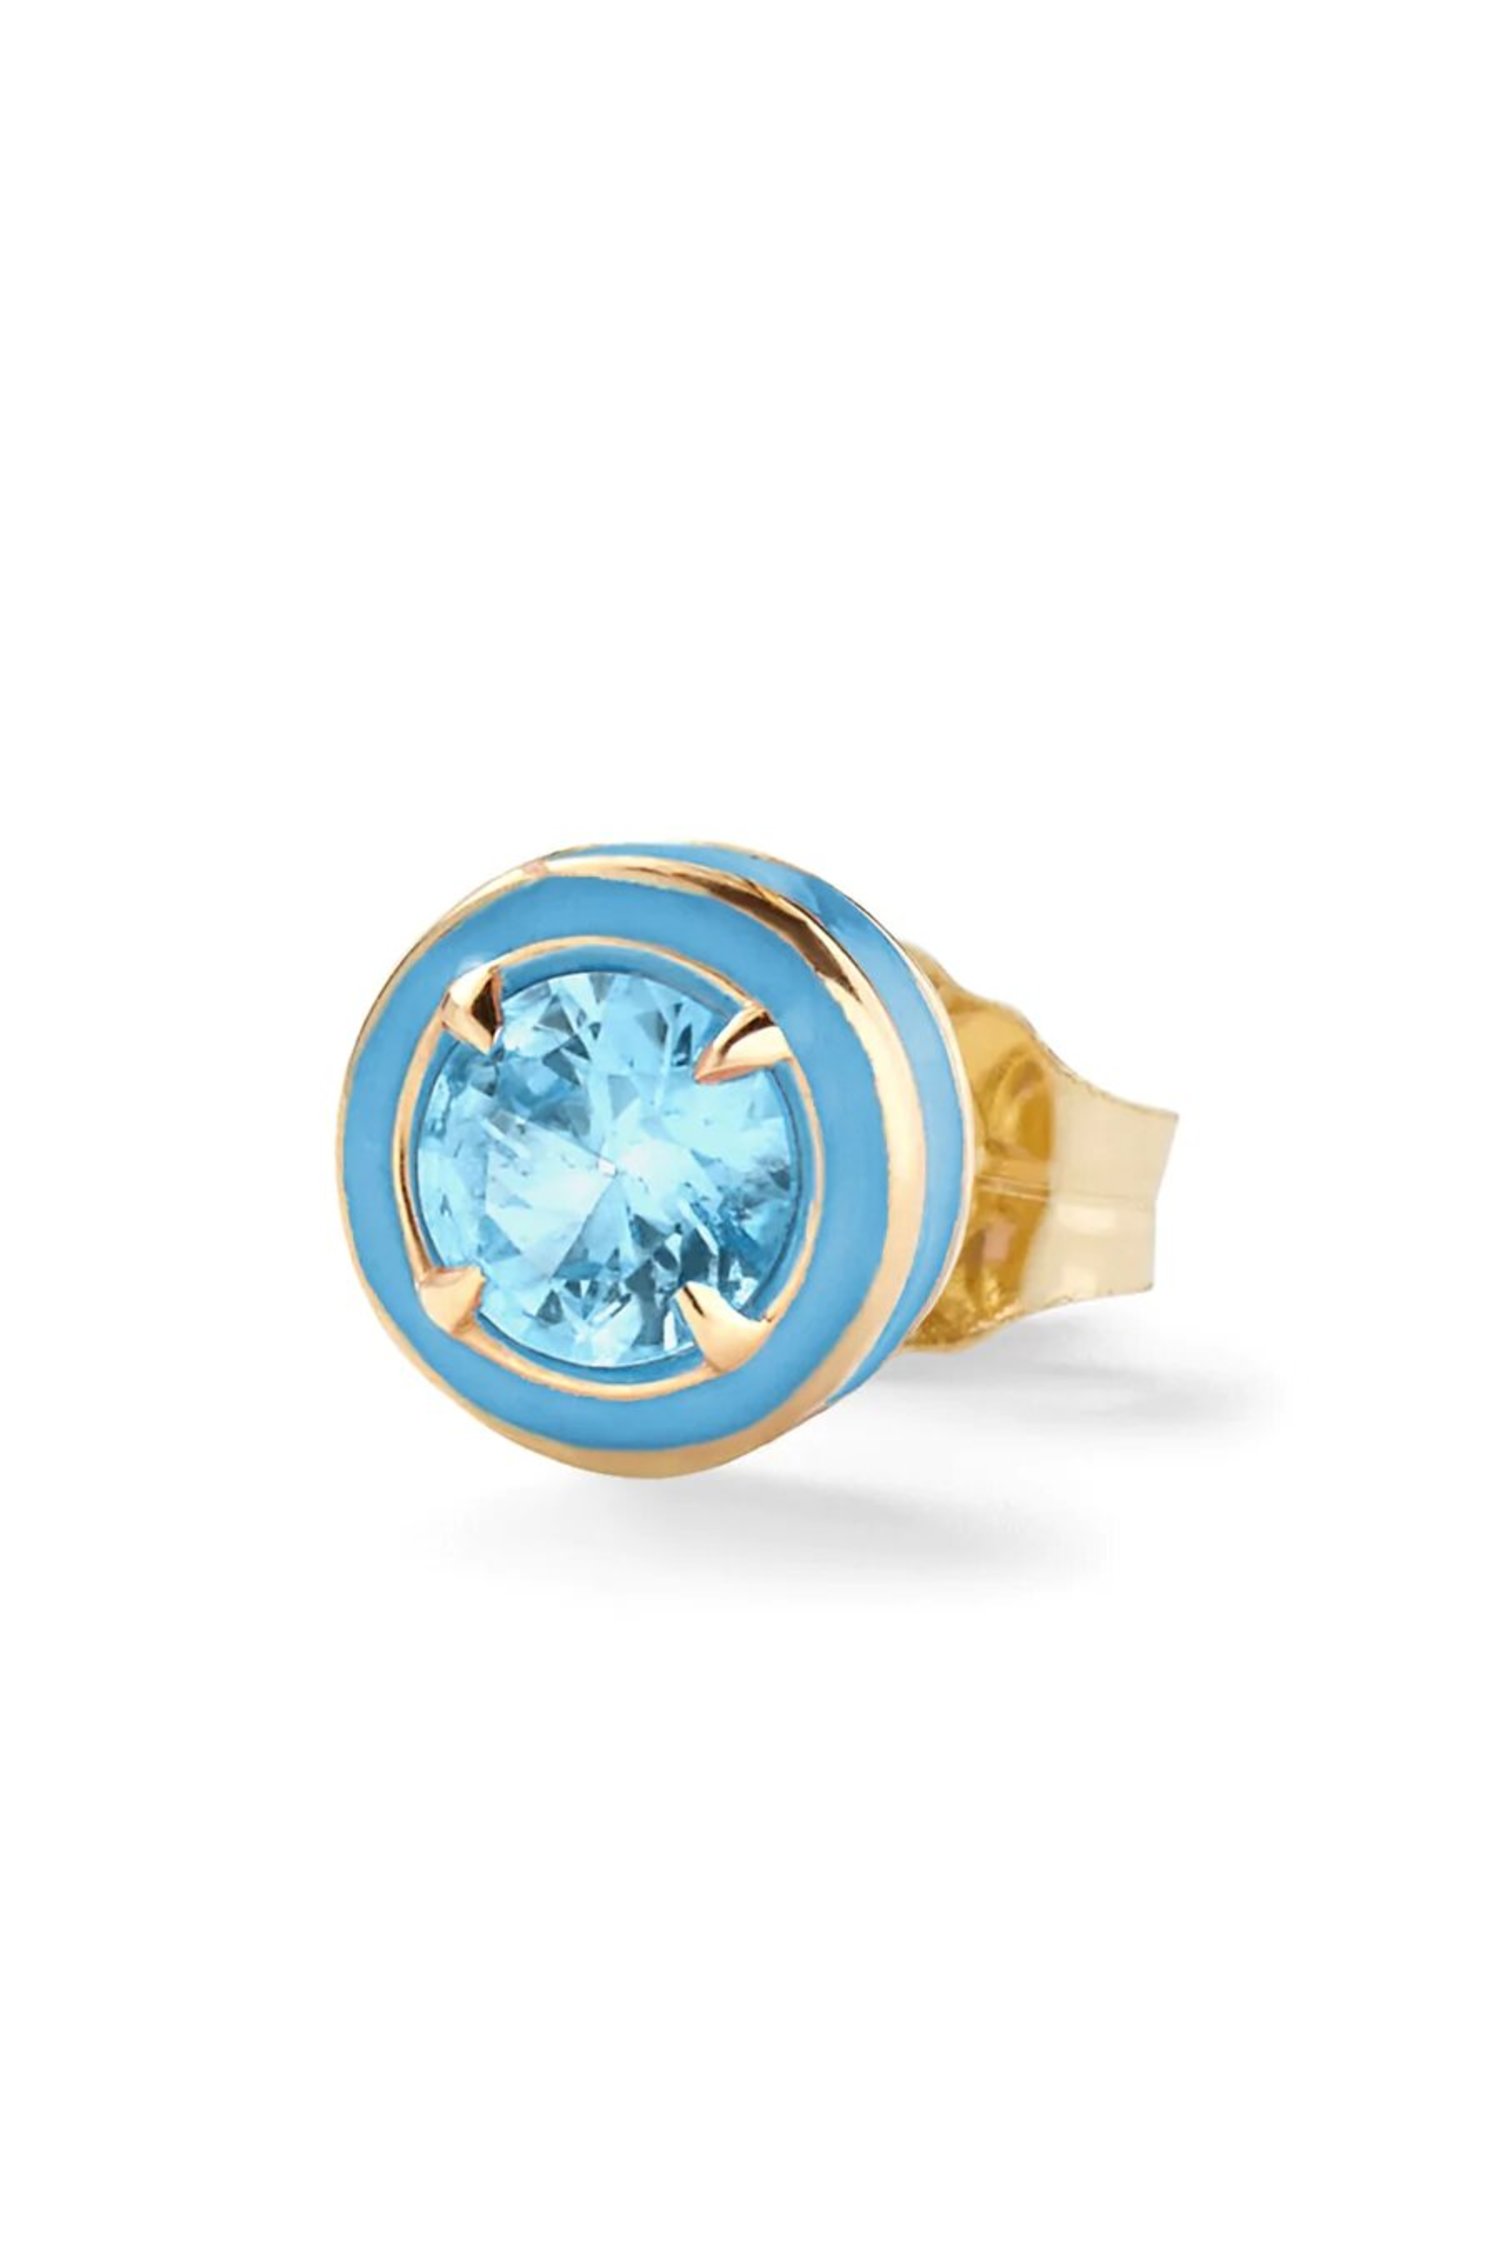 Mini Round Blue Topaz Cocktail Stud in 14K Yellow Gold